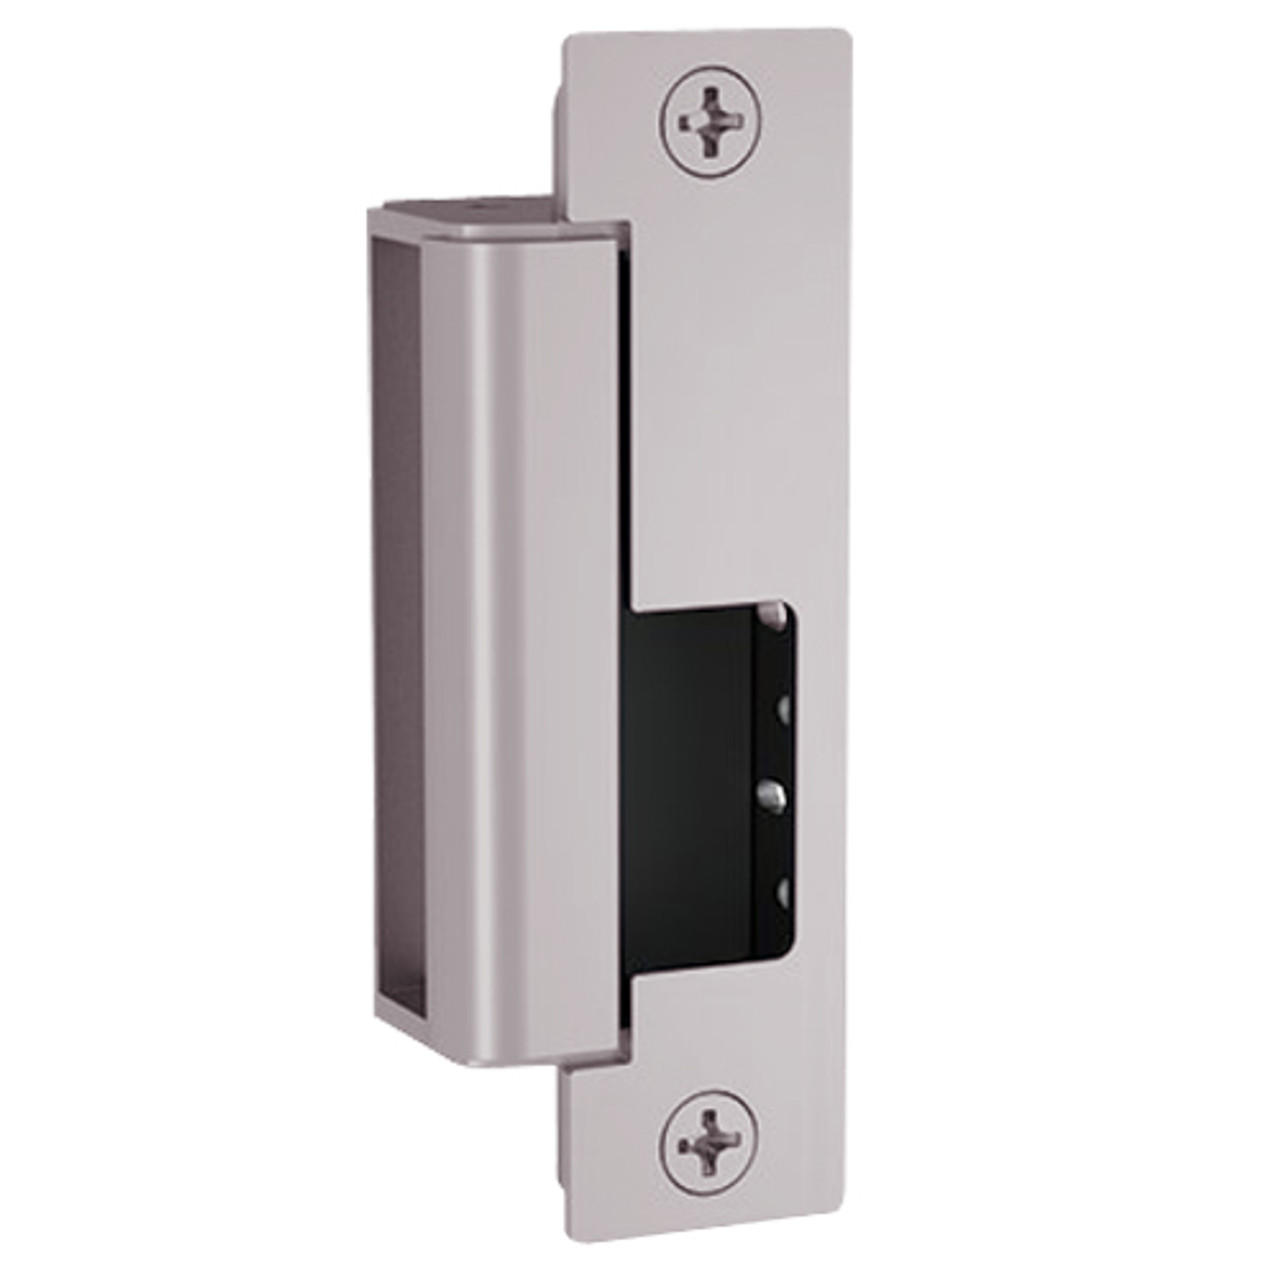 1500C-DLM-630 Hes 1500 Series Heavy Duty Complete Electric Strike with Dual Lock Monitor in Satin Stainless Steel